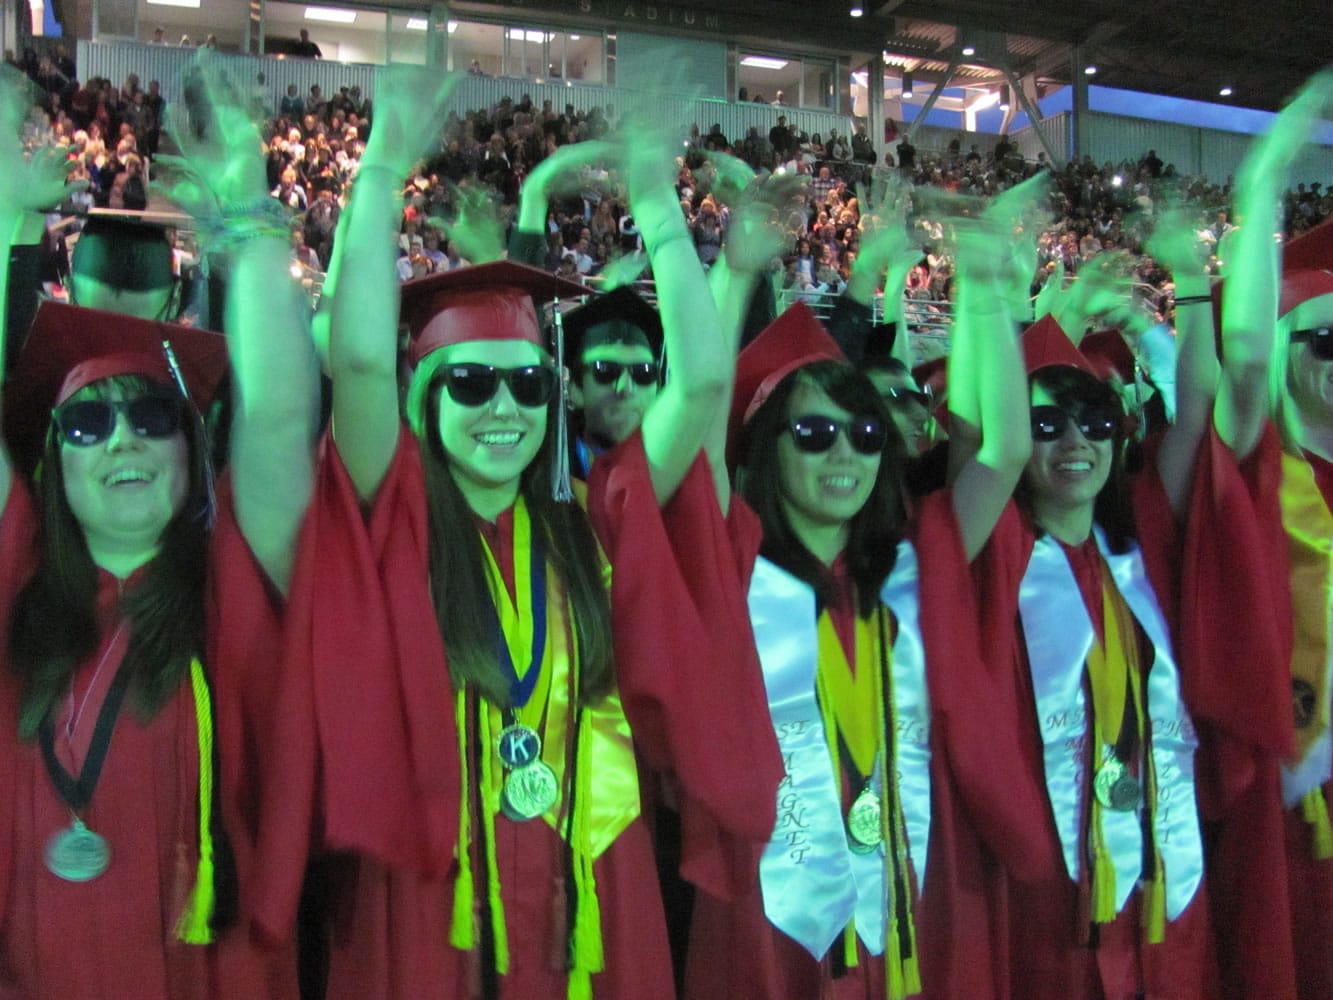 After CHS graduates moved the tassels on their caps from right to left, each student donned a pair of sunglasses and danced to &quot;Forever,&quot; by Chris Brown.